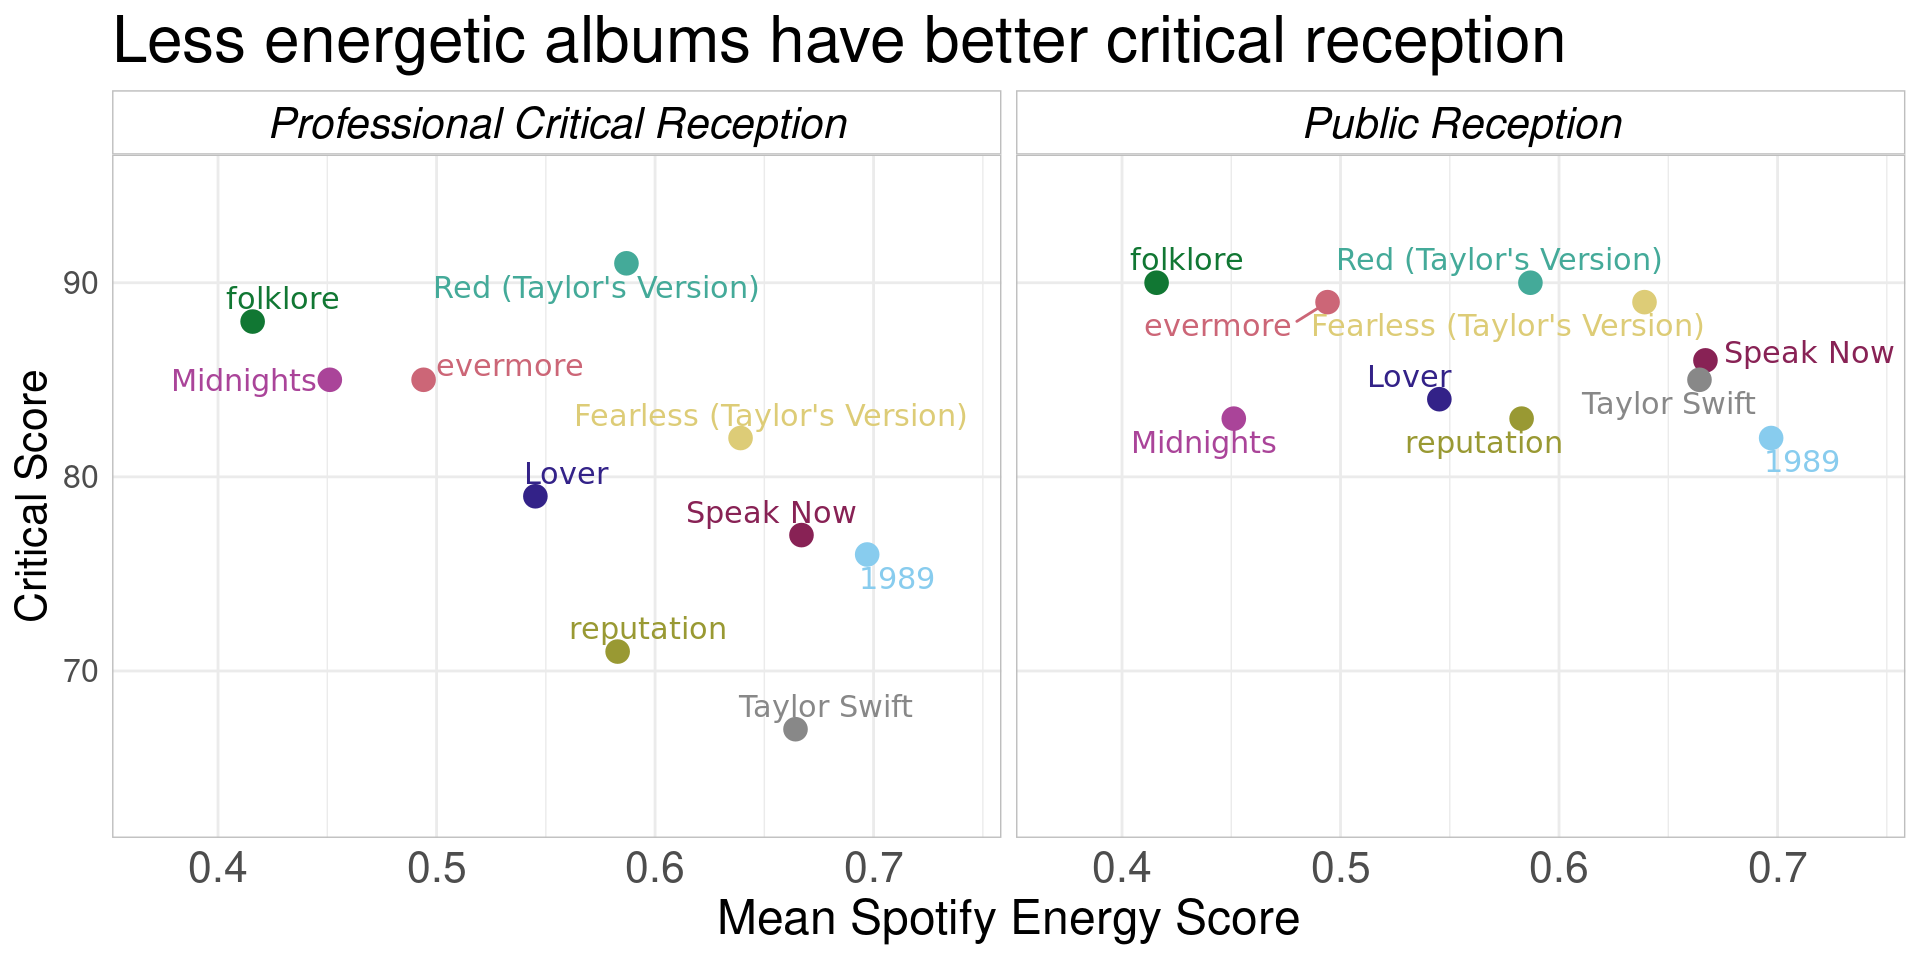 The plot is titled Less energetic albums have better critical reception. It is a scatterplot with two facets. One shows mean metacritic scores vs average energy score for each taylor swift album. The second plot shows user scores vs average energy scores for each album. The metacritic scores plot shows a clear negative correlation between mean energy scorea and critic score. The user scores plot shows that there is not a correlation between user scores and energy scores. This plot shows that there is more variability in the preferences of the general public for energetic vs less energetic music than there is among professional critics.